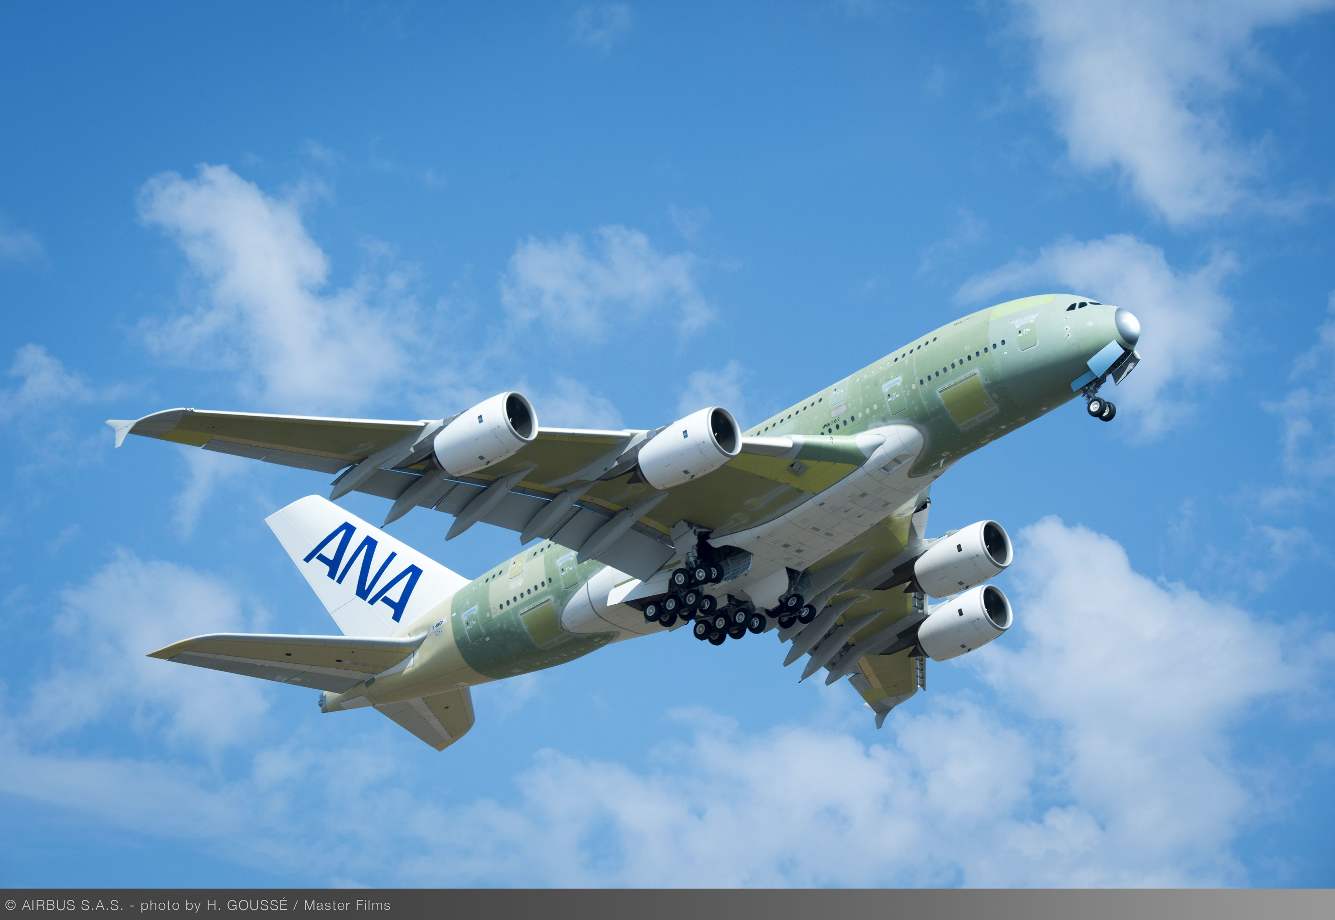 First ANA A380 takes to the skies